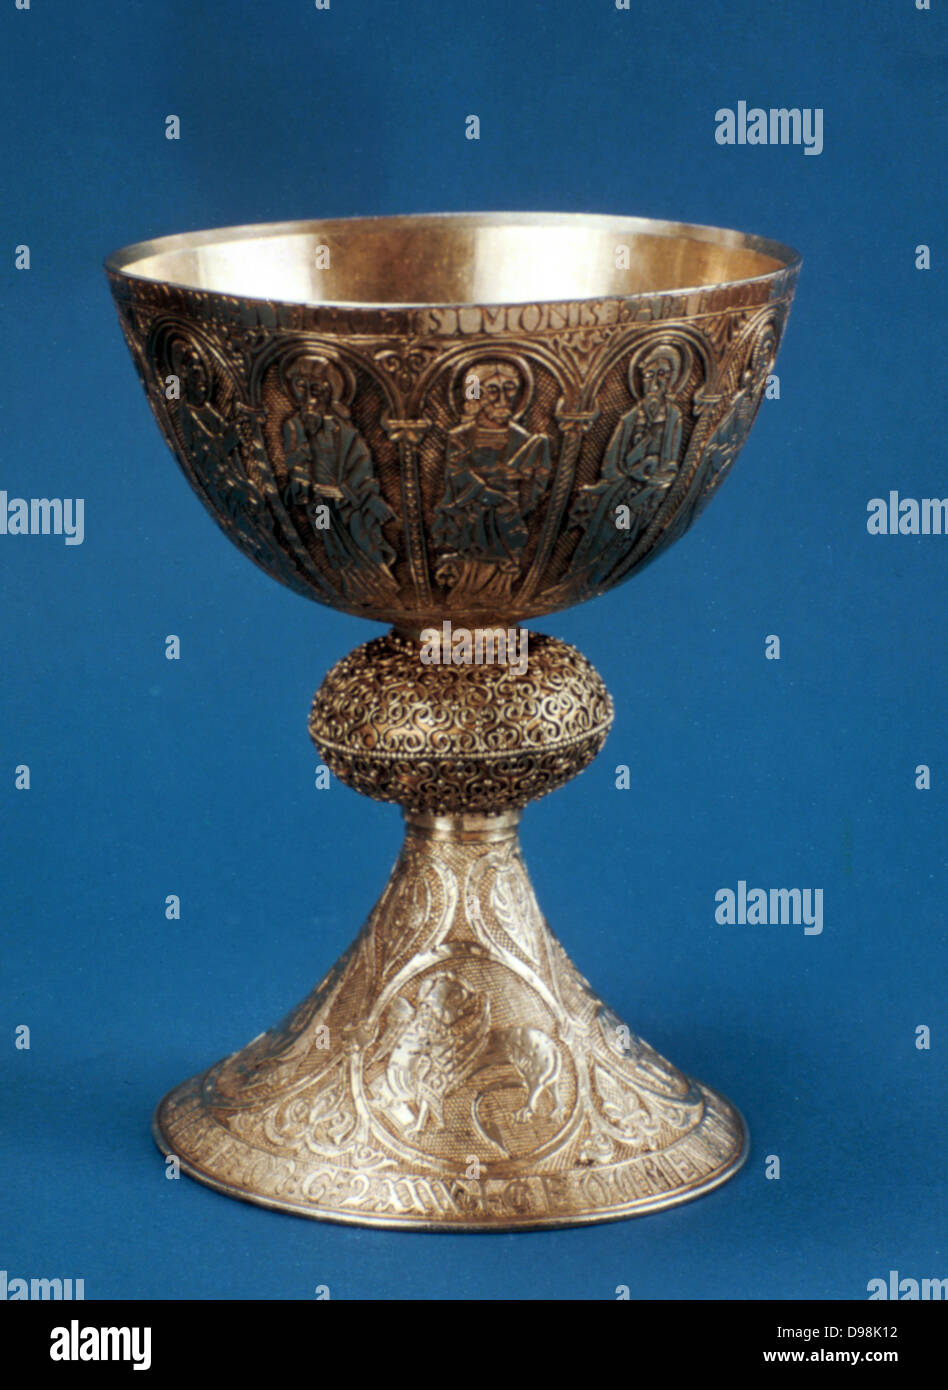 Silver chalice. Portugal, 13th century sacred vessel. Church plate. Stock Photo